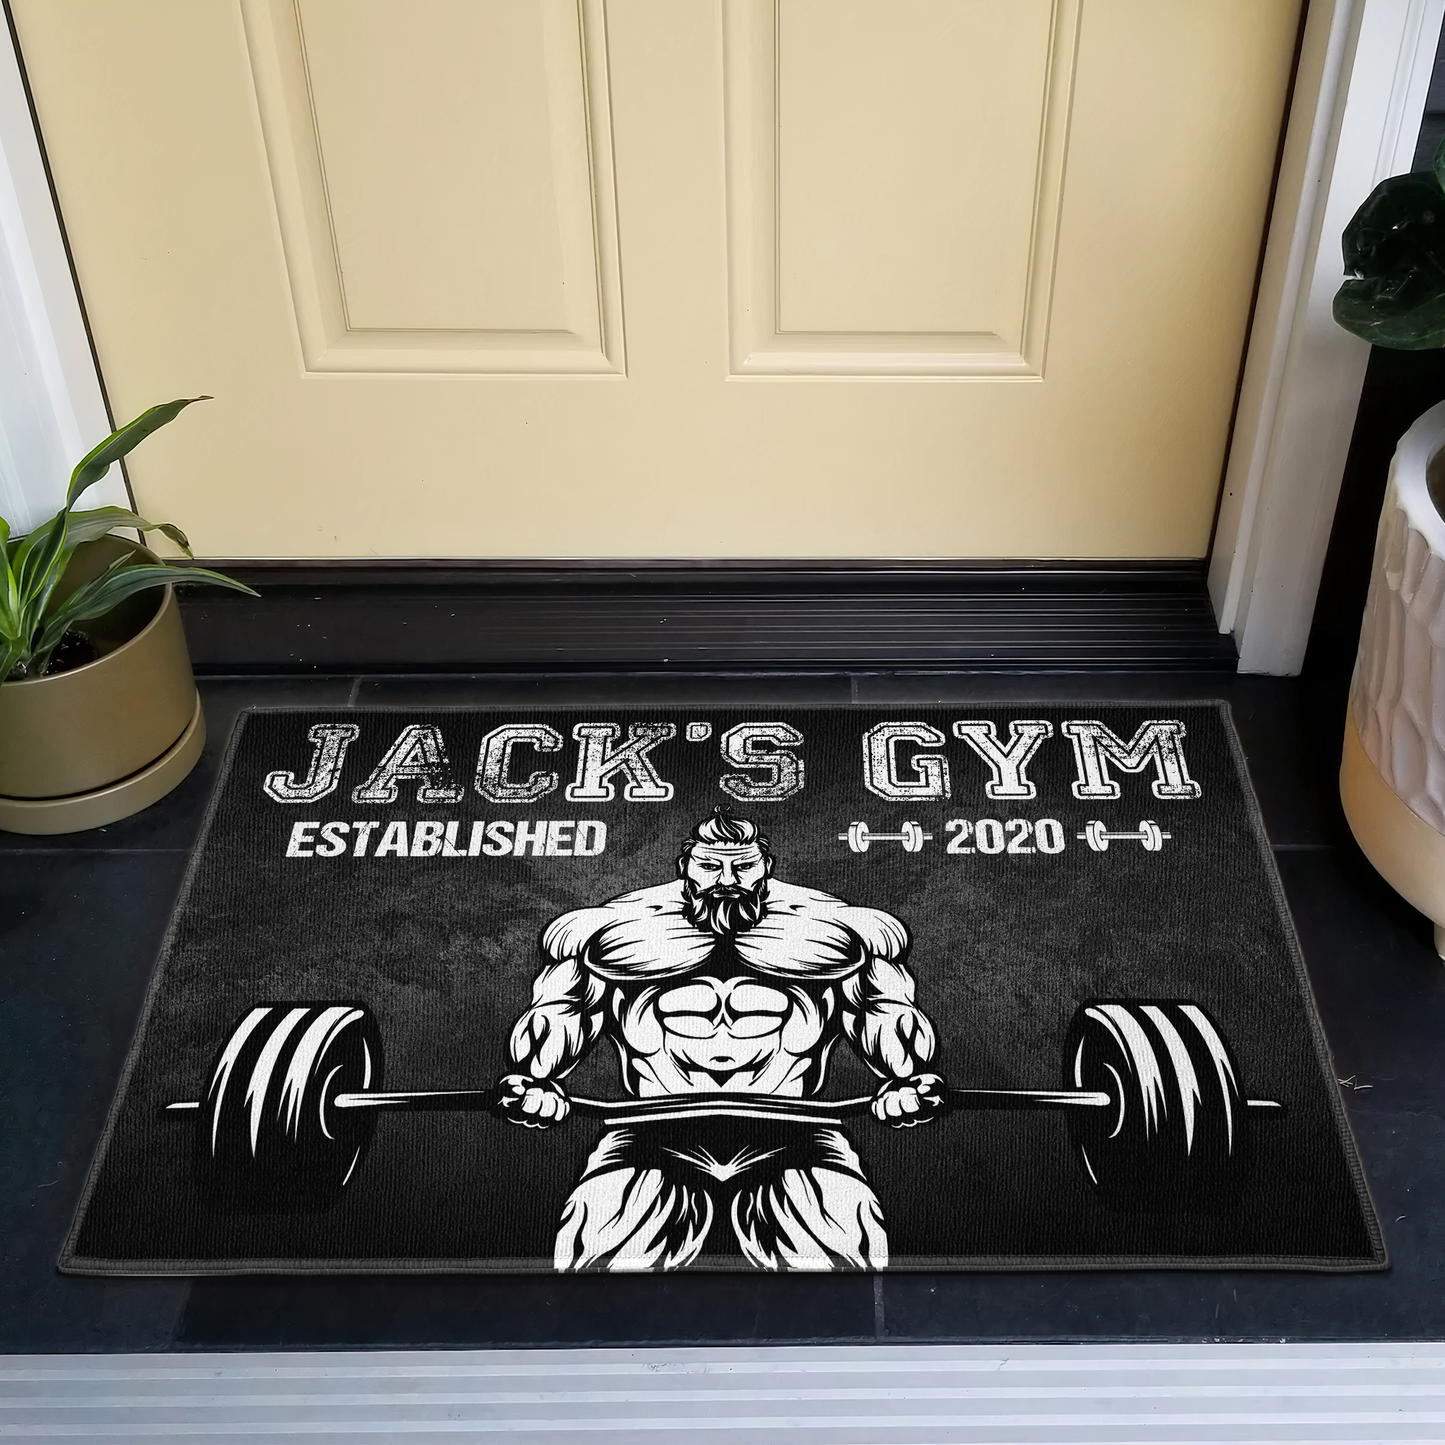 Old Man Gym Room - Personalized Doormat  - Gift For Gymer - Old Man Lifting